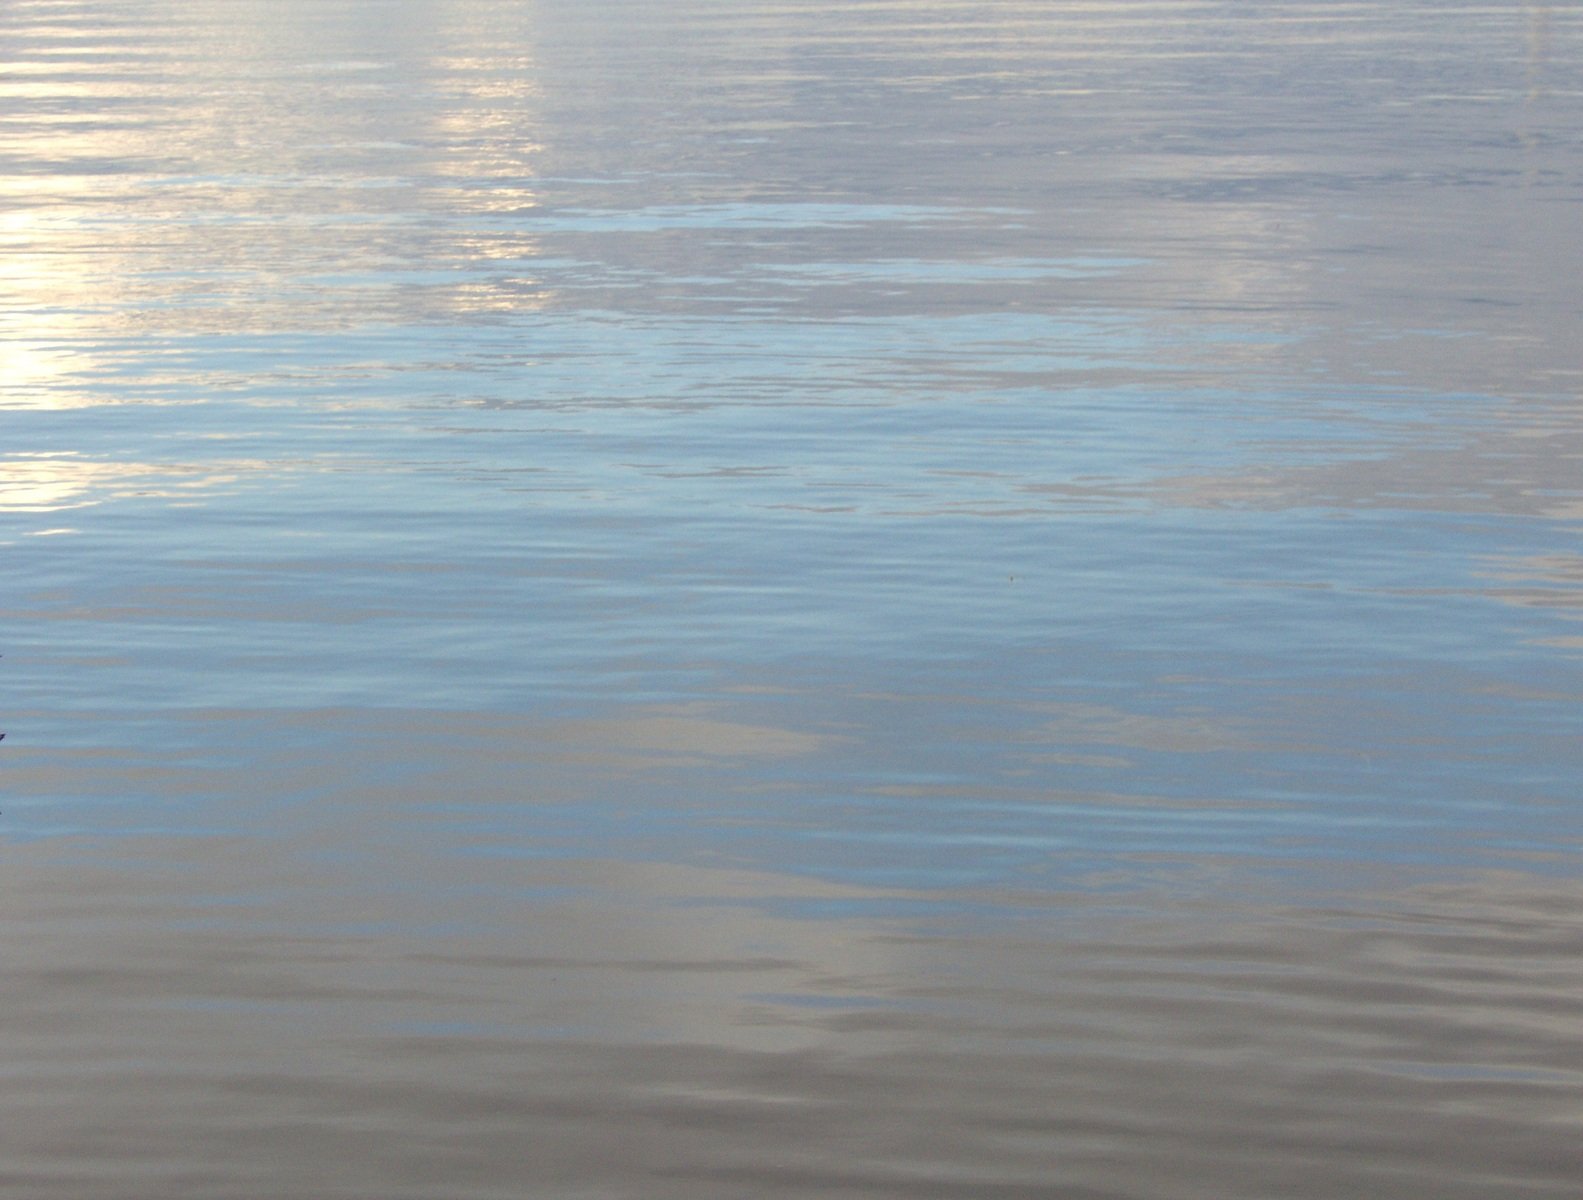 a single seagull sits on the shoreline with a calm water reflection